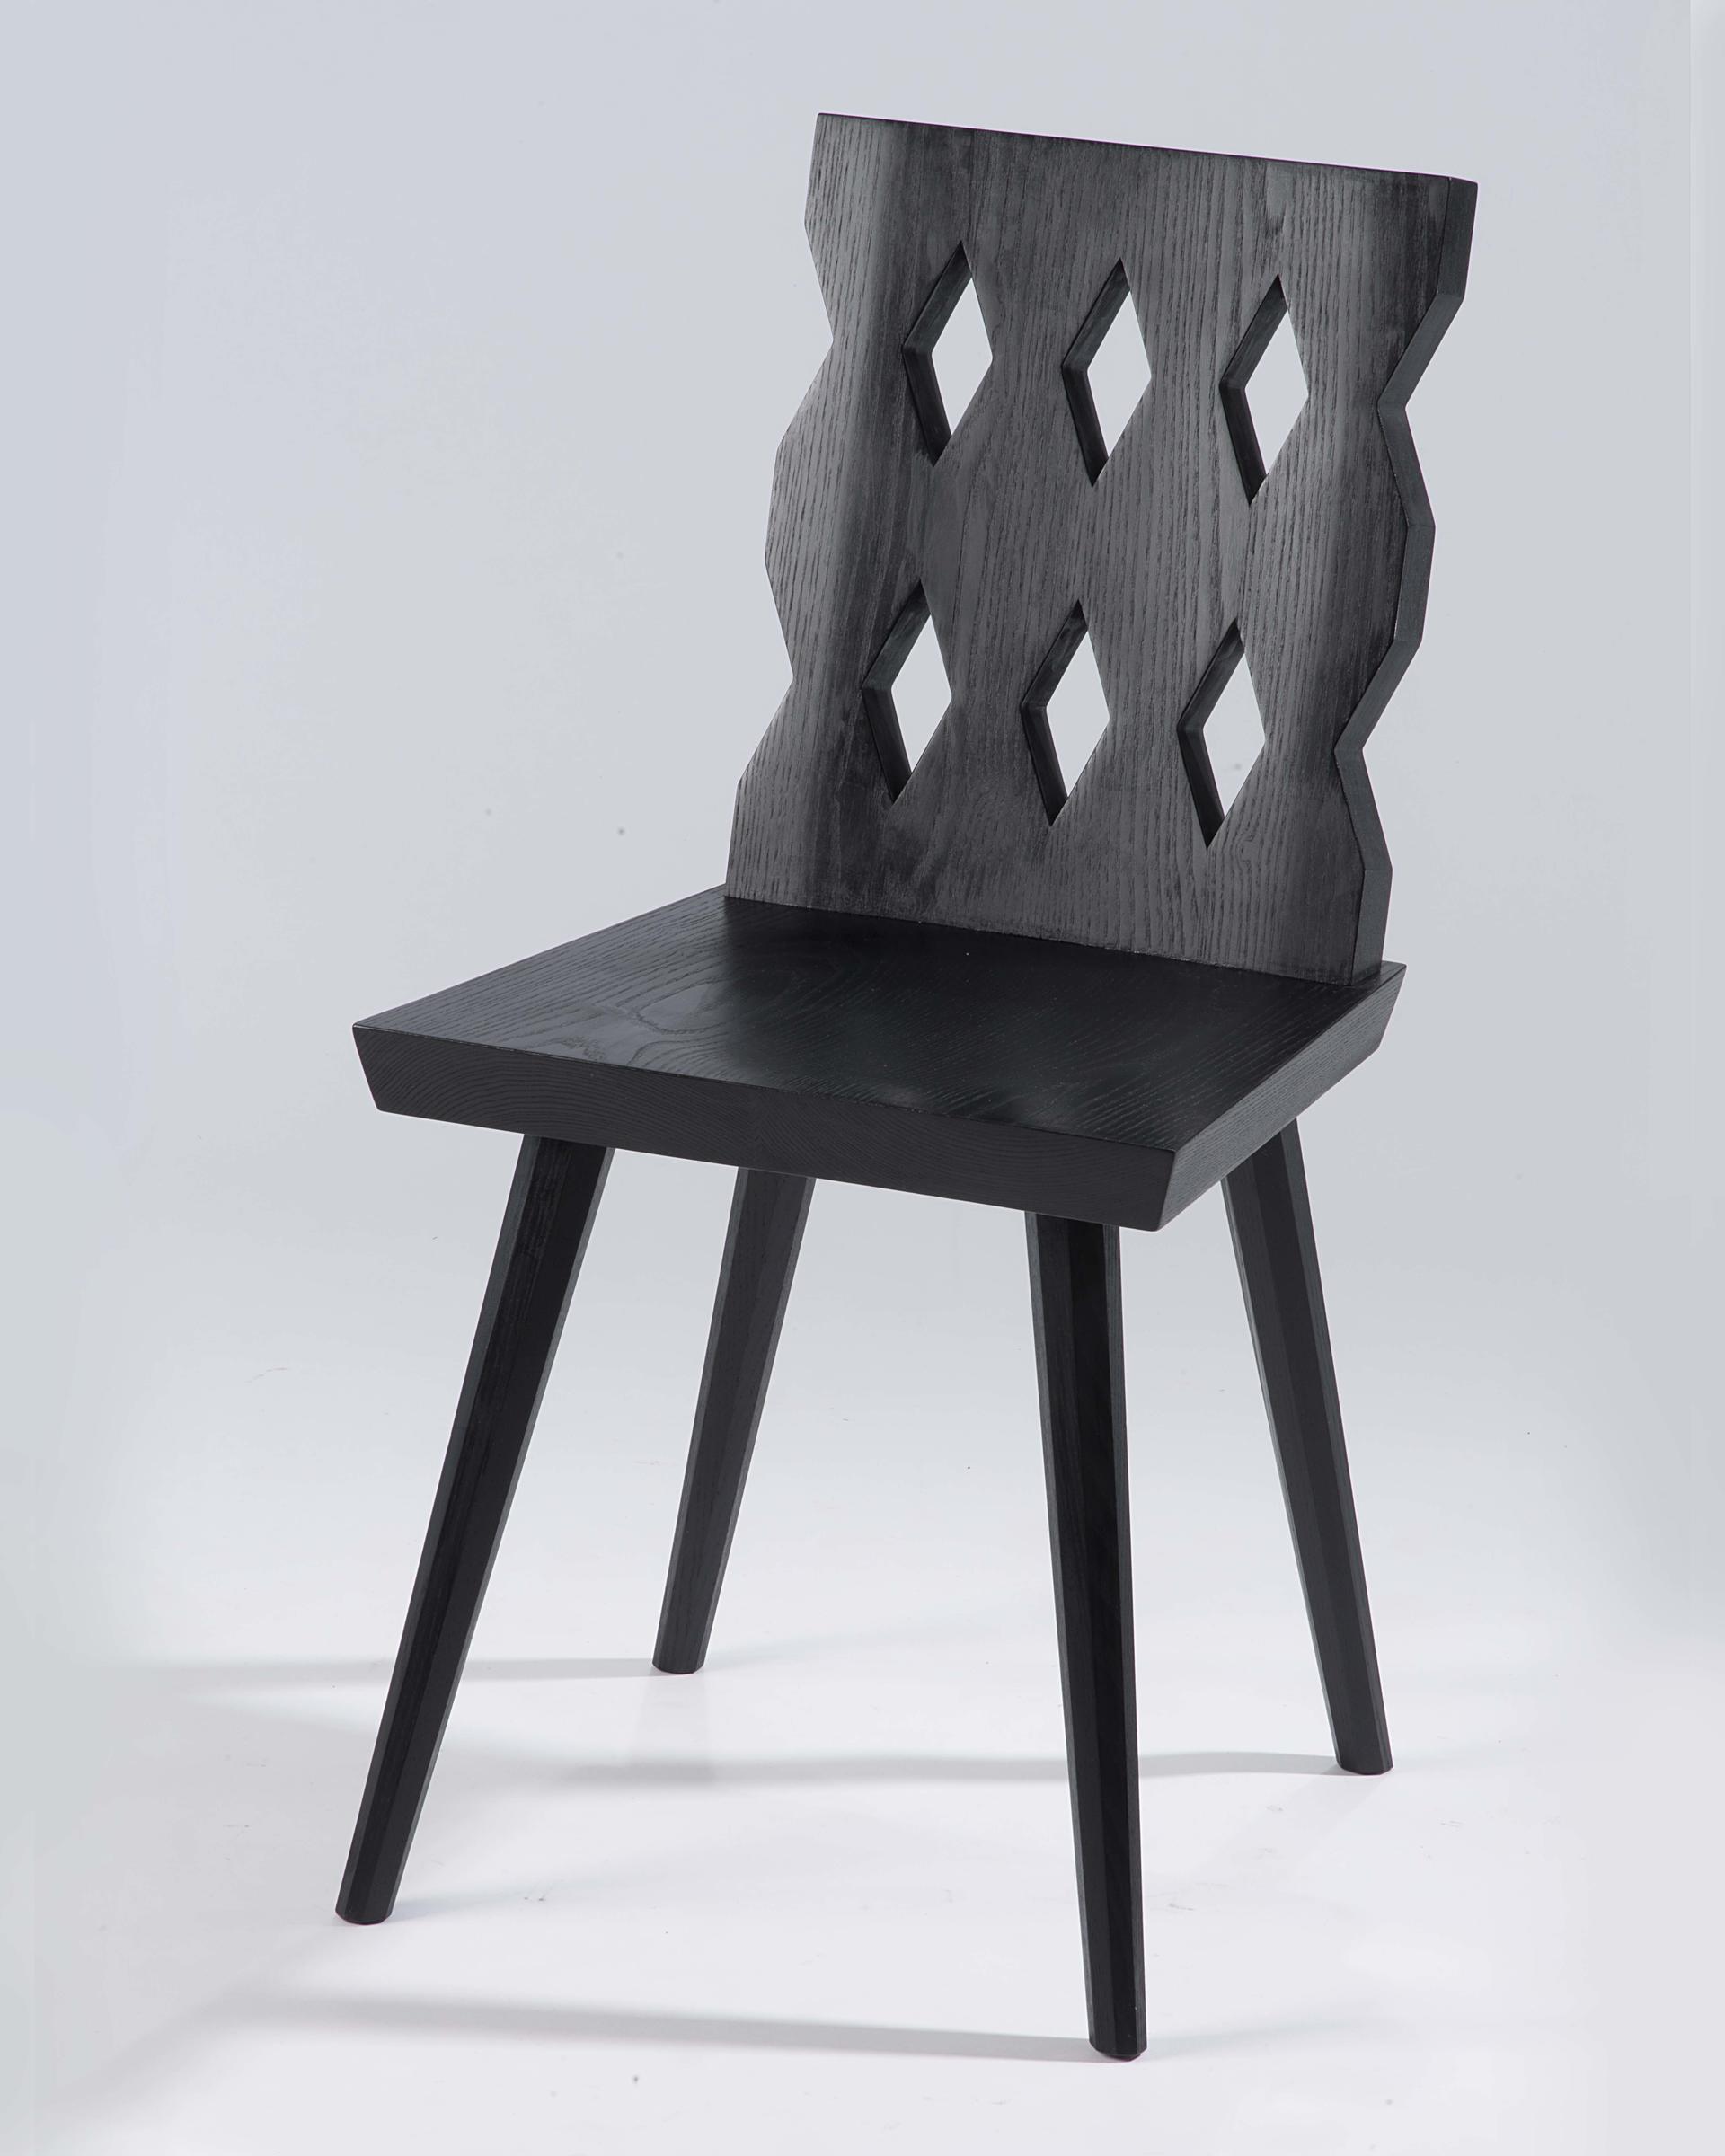 Wooden chair in black finish